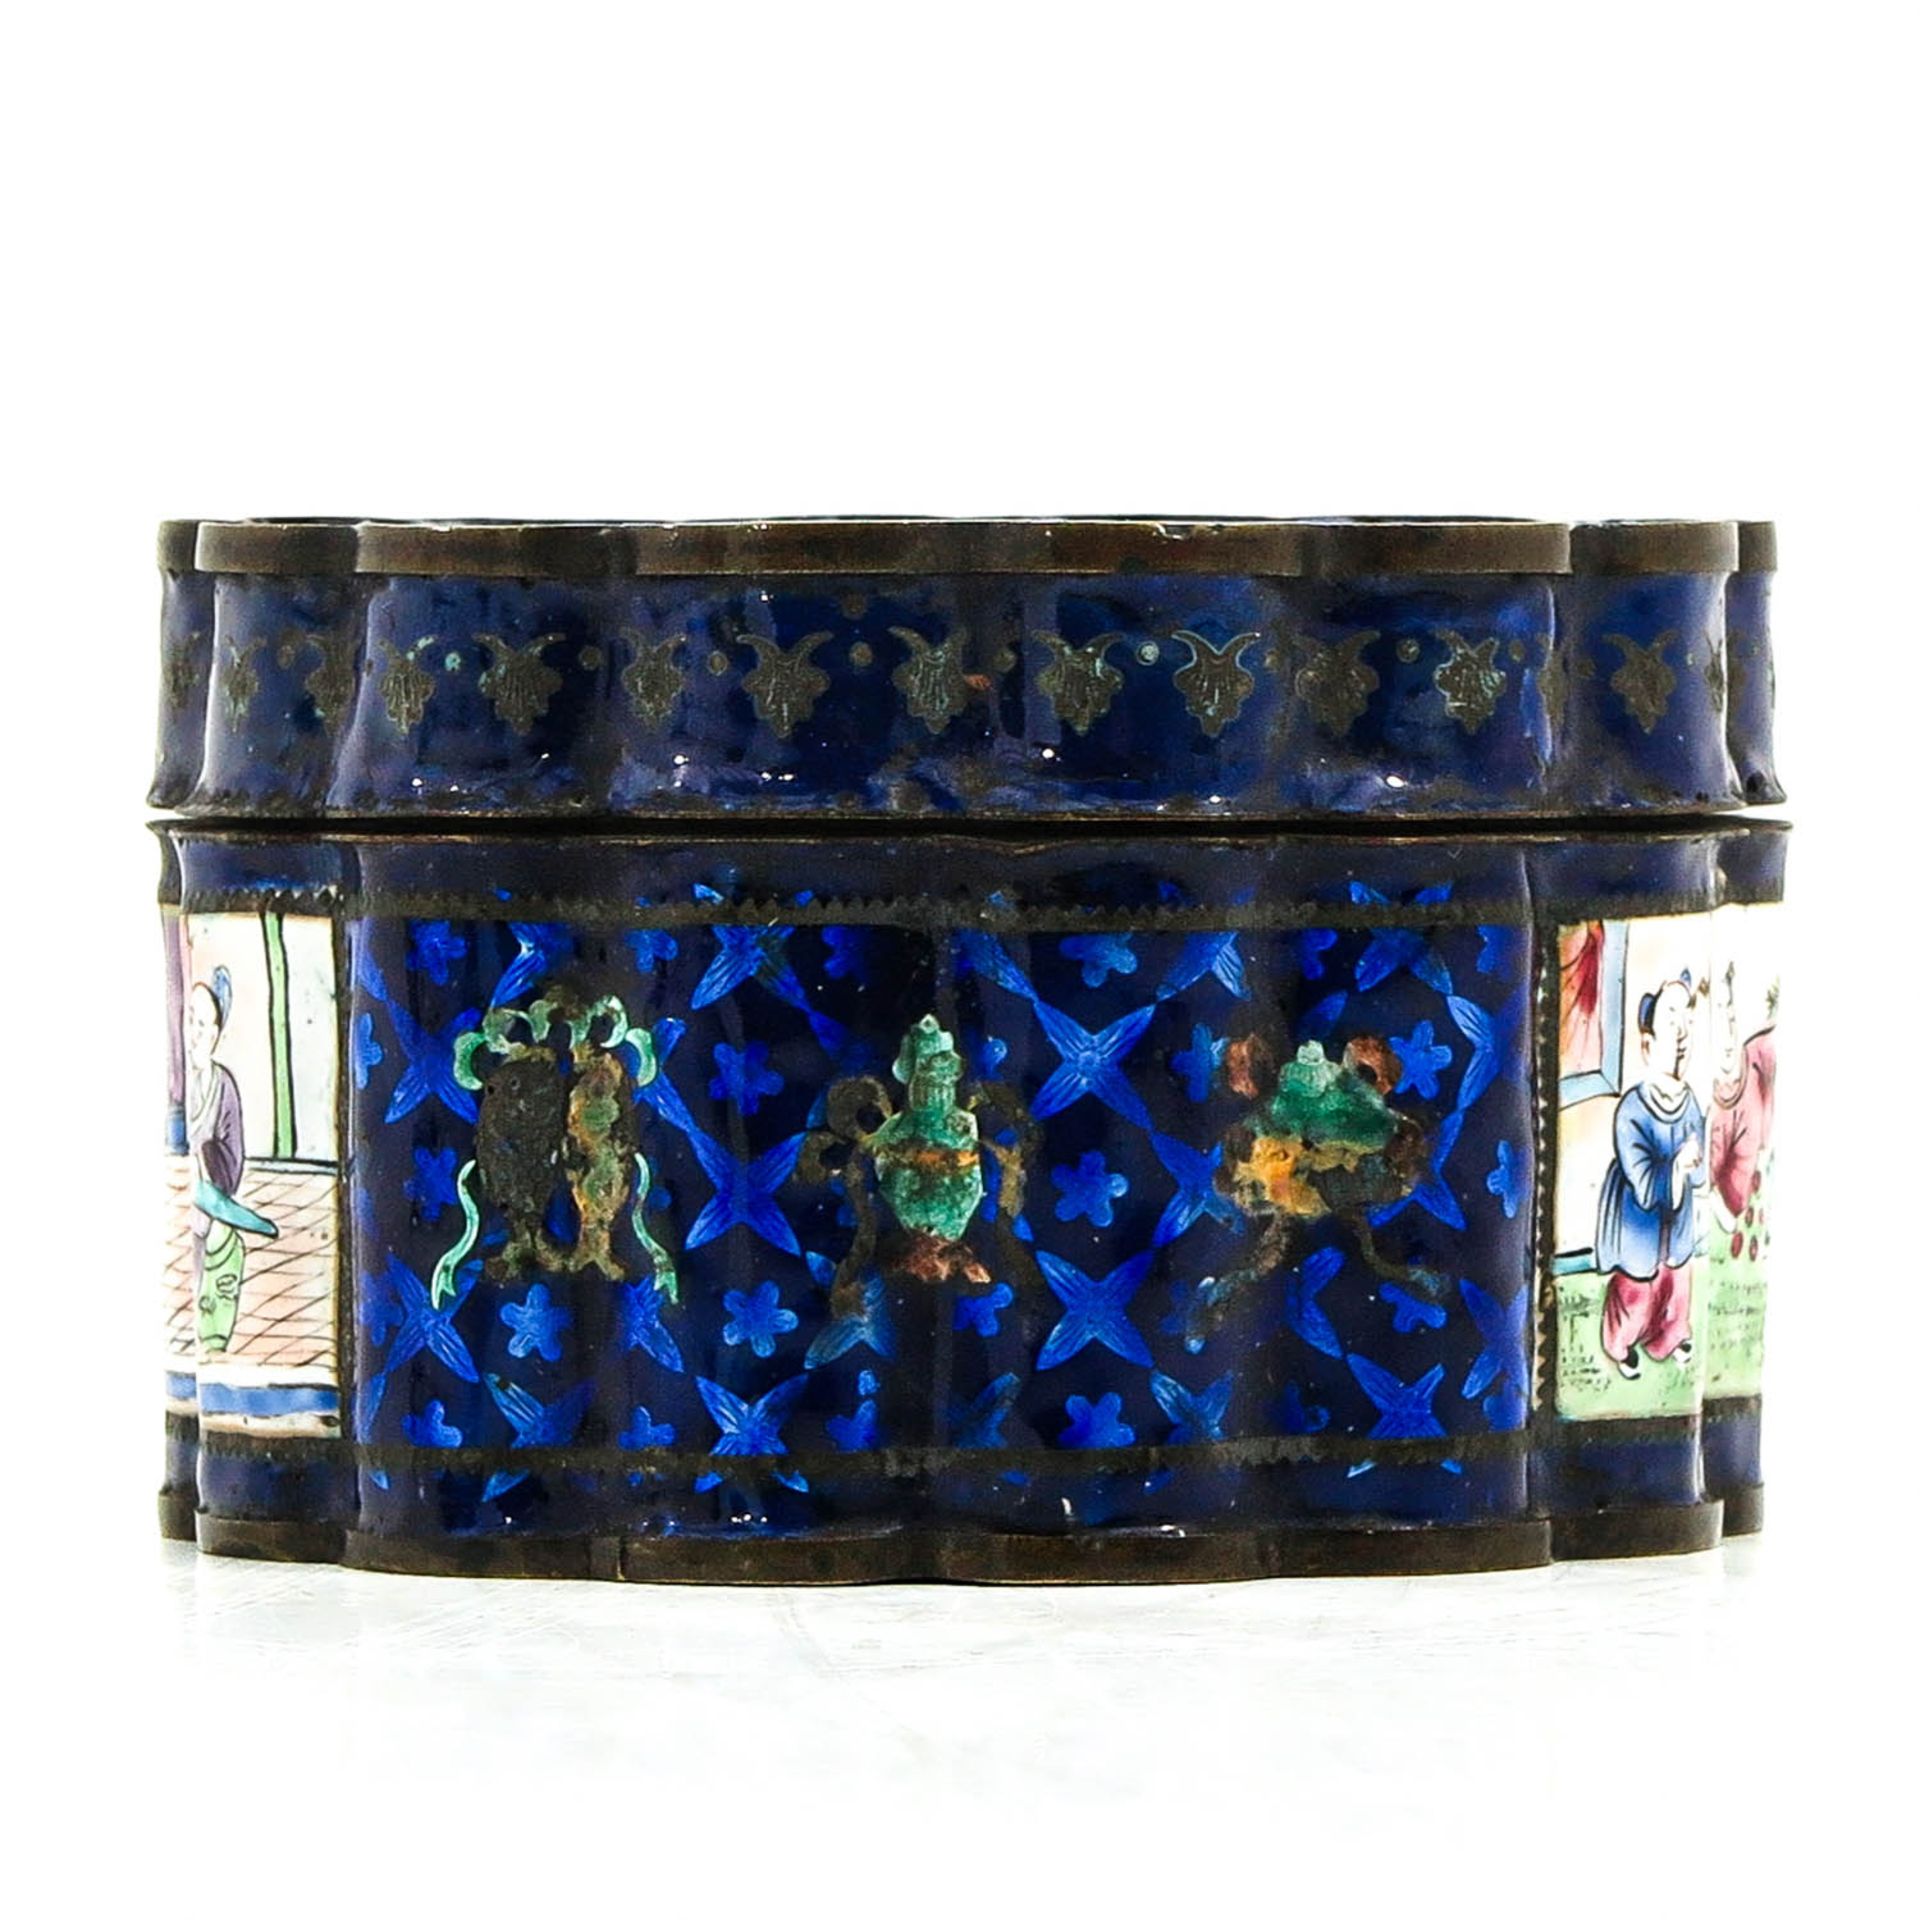 A Round Cloisonne Box - Image 2 of 10